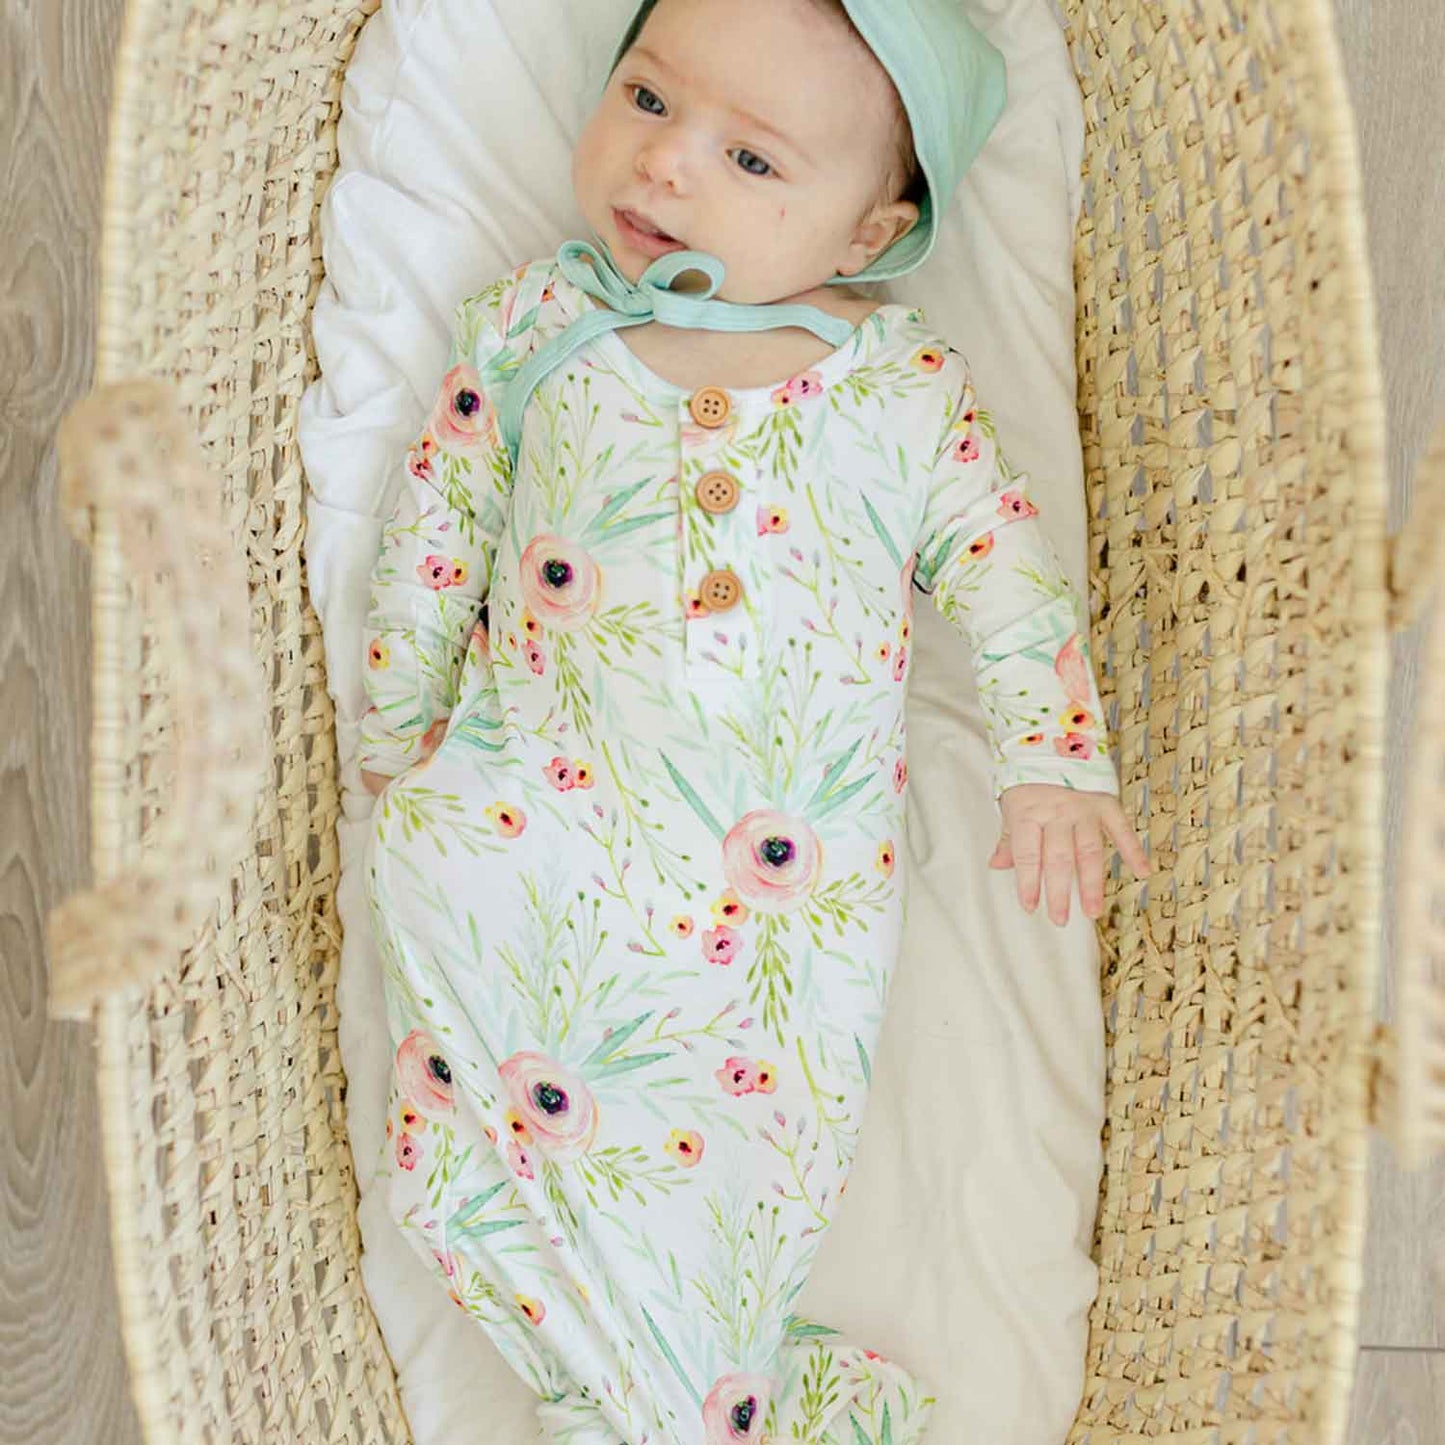 Dolly Lana - Knotted baby gown - Floral Kiss